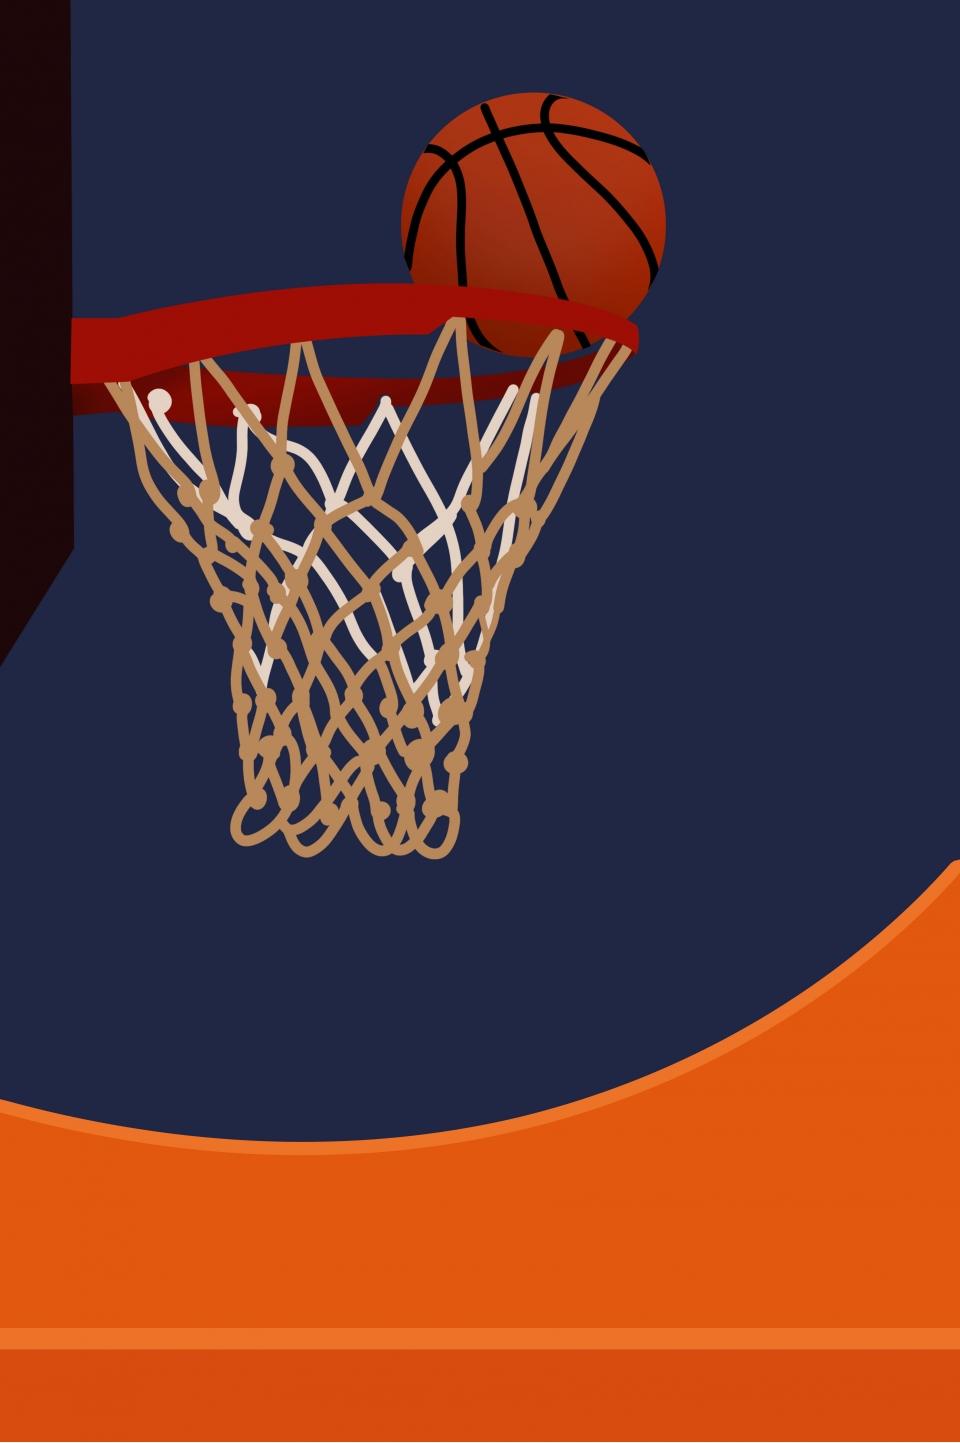 Hand Painted Cartoon Basketball Ball Game Poster Background